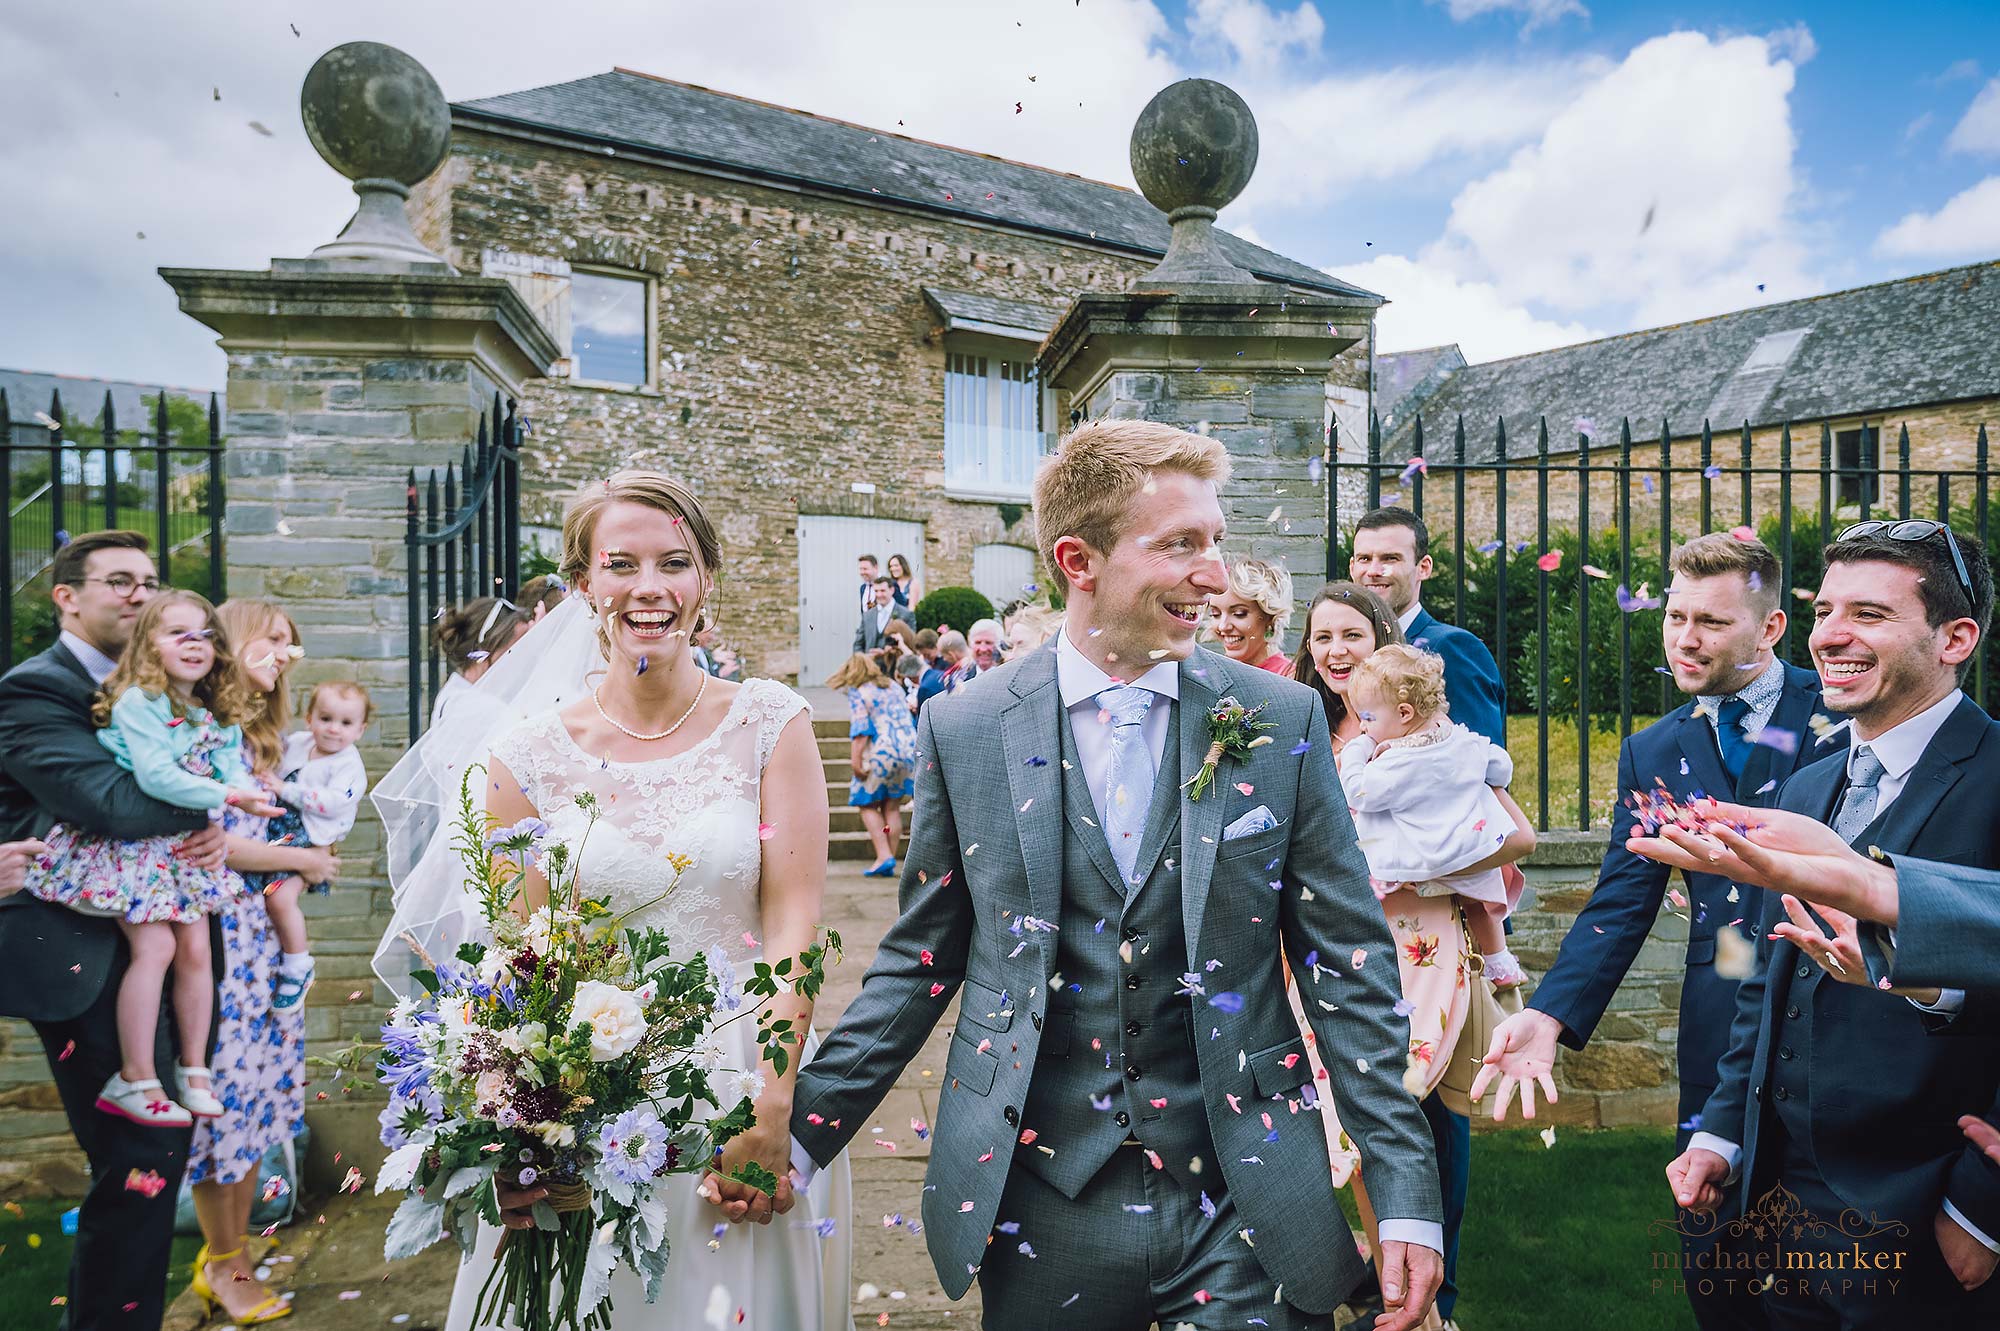 Guests throwing confetti at luxury Devon wedding venue near Plymouth called Shilstone House.